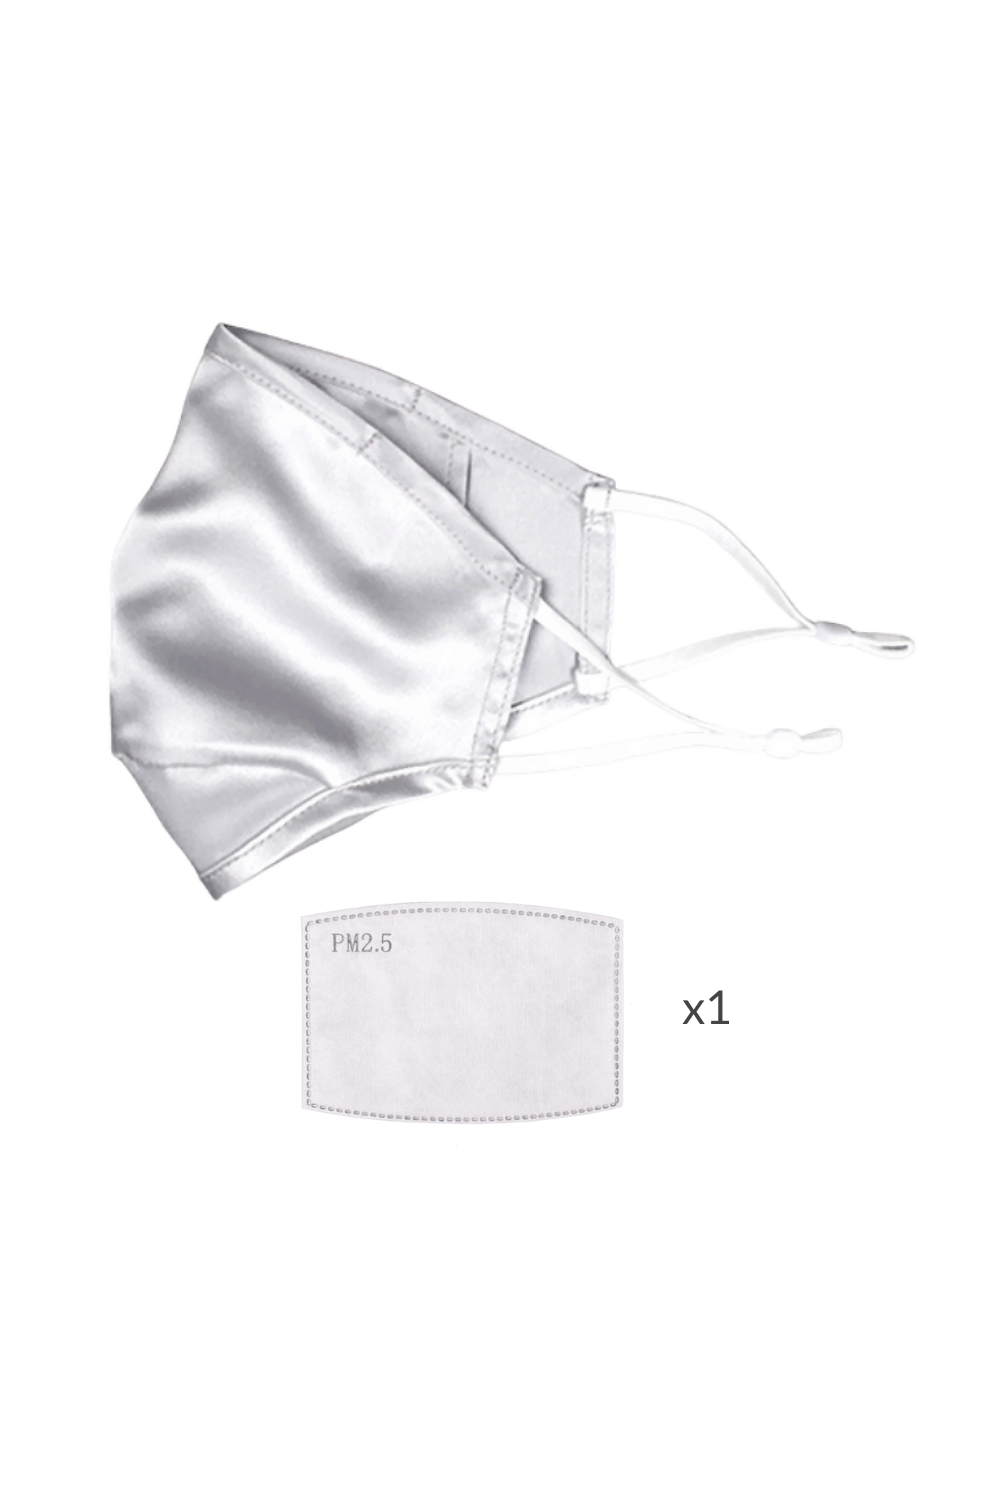 ULTRA Silk Face Mask - Silver (with Filter Pocket and Nose Wire) - BASK™